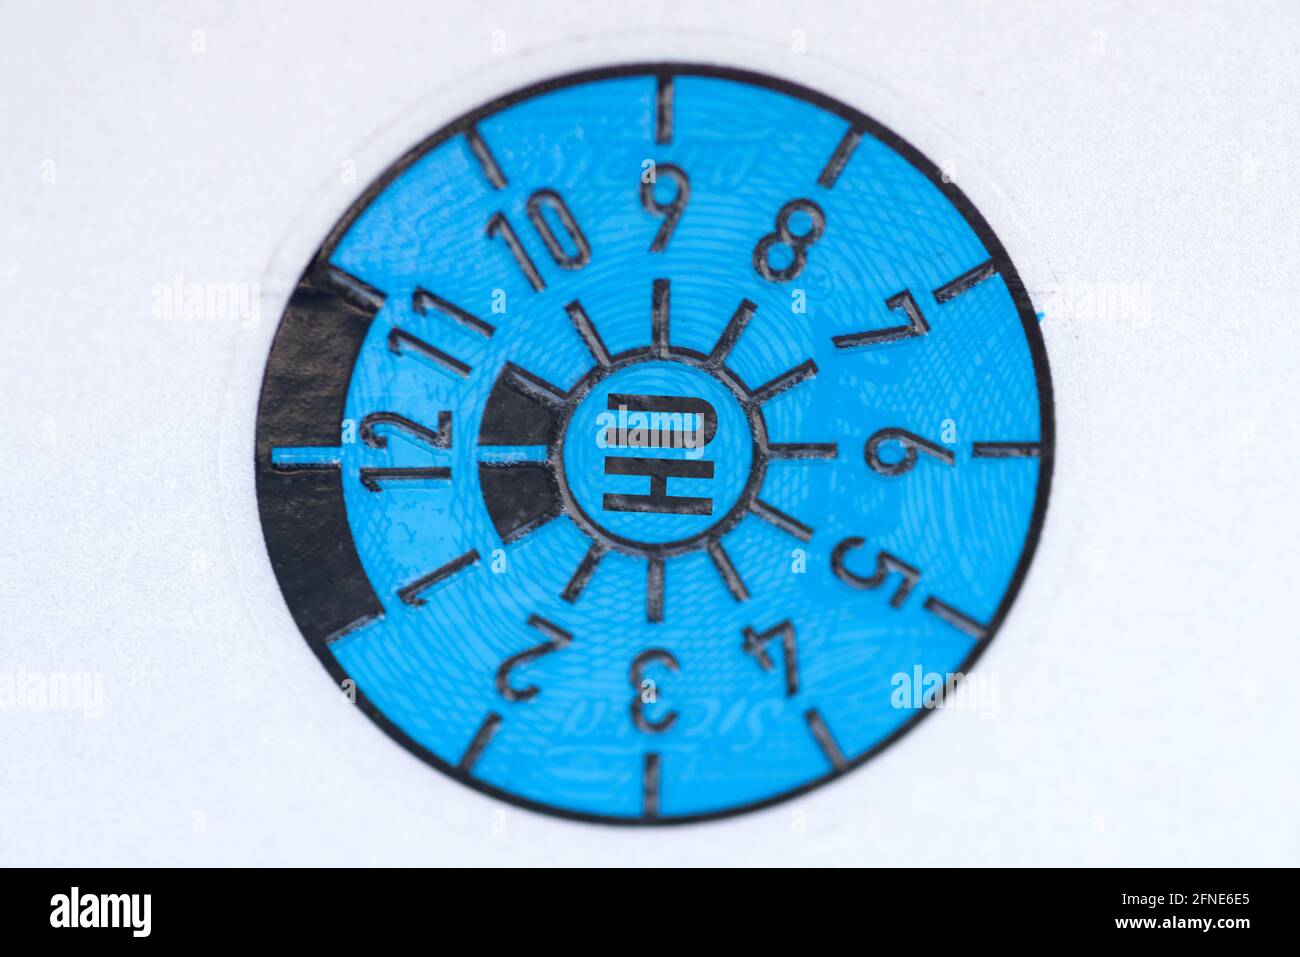 A blue Technical Inspection Association badge on the car license plate Stock Photo